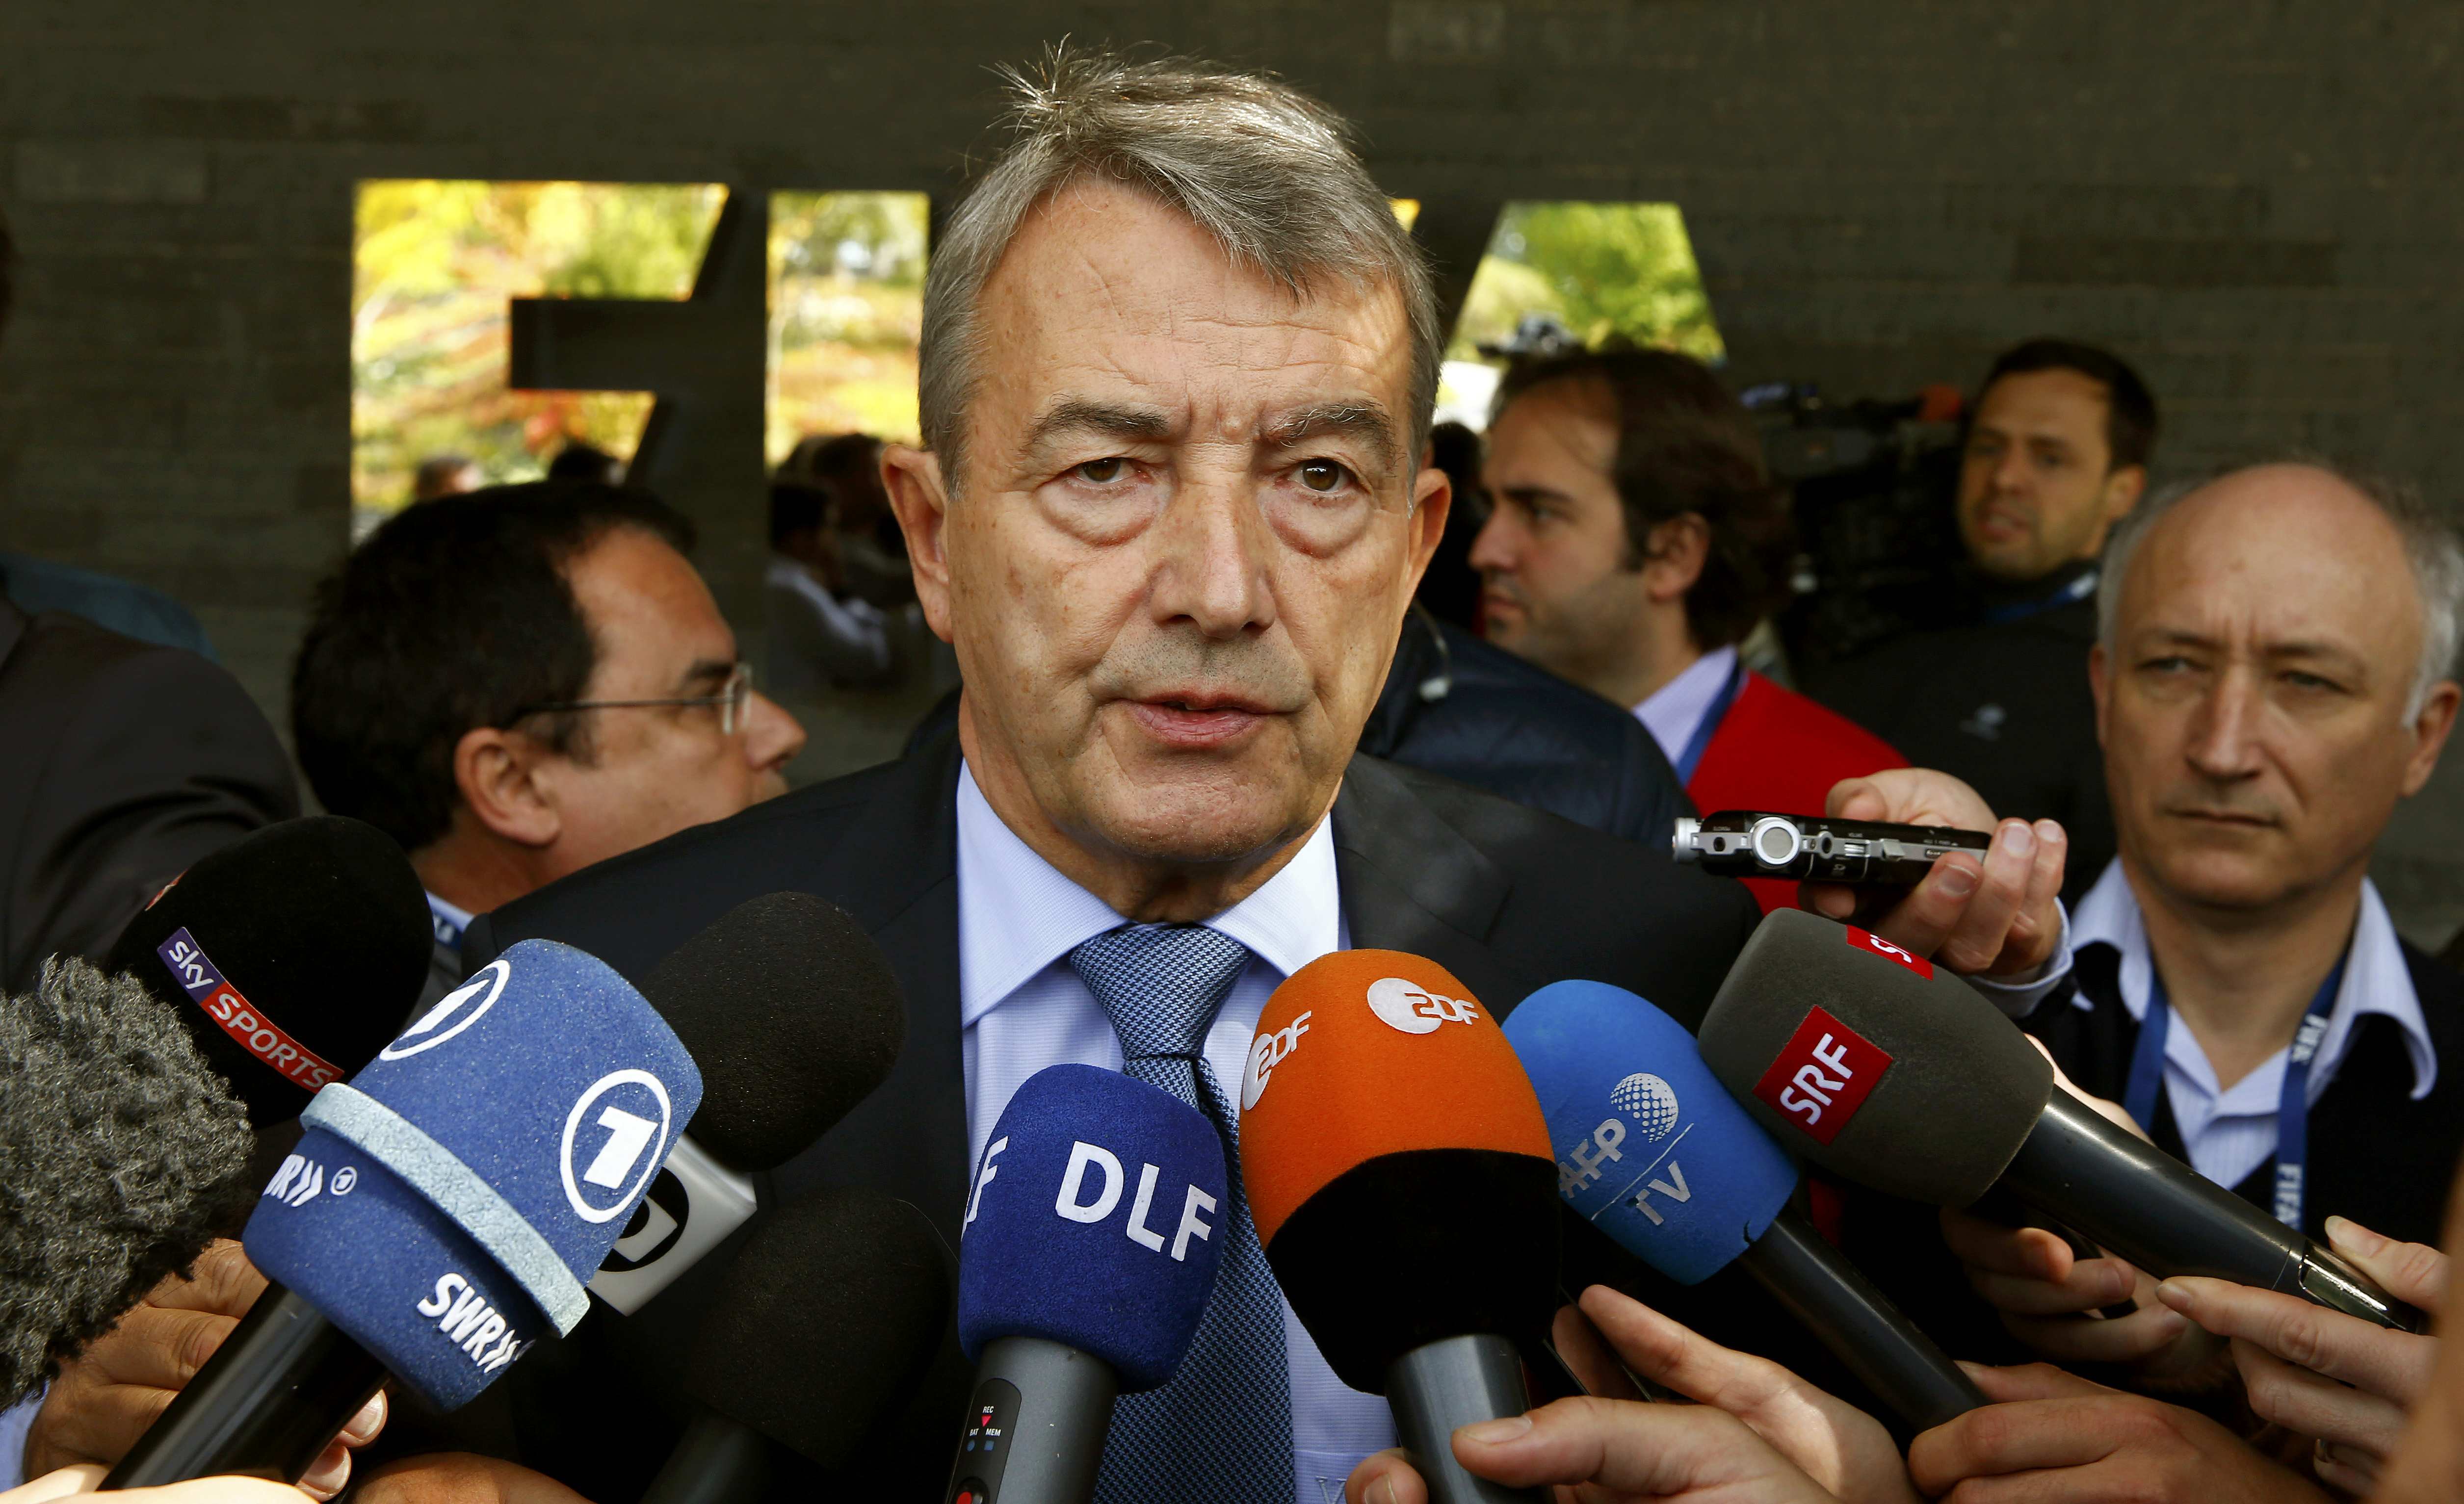 Wolfgang Niersbach, the German Soccer Association (DFB) President and member of the FIFA executive committee, talks to the media during a meeting of the FIFA executive committee in Zurich, Switzerland September 25, 2015. REUTERS/Arnd Wiegmann